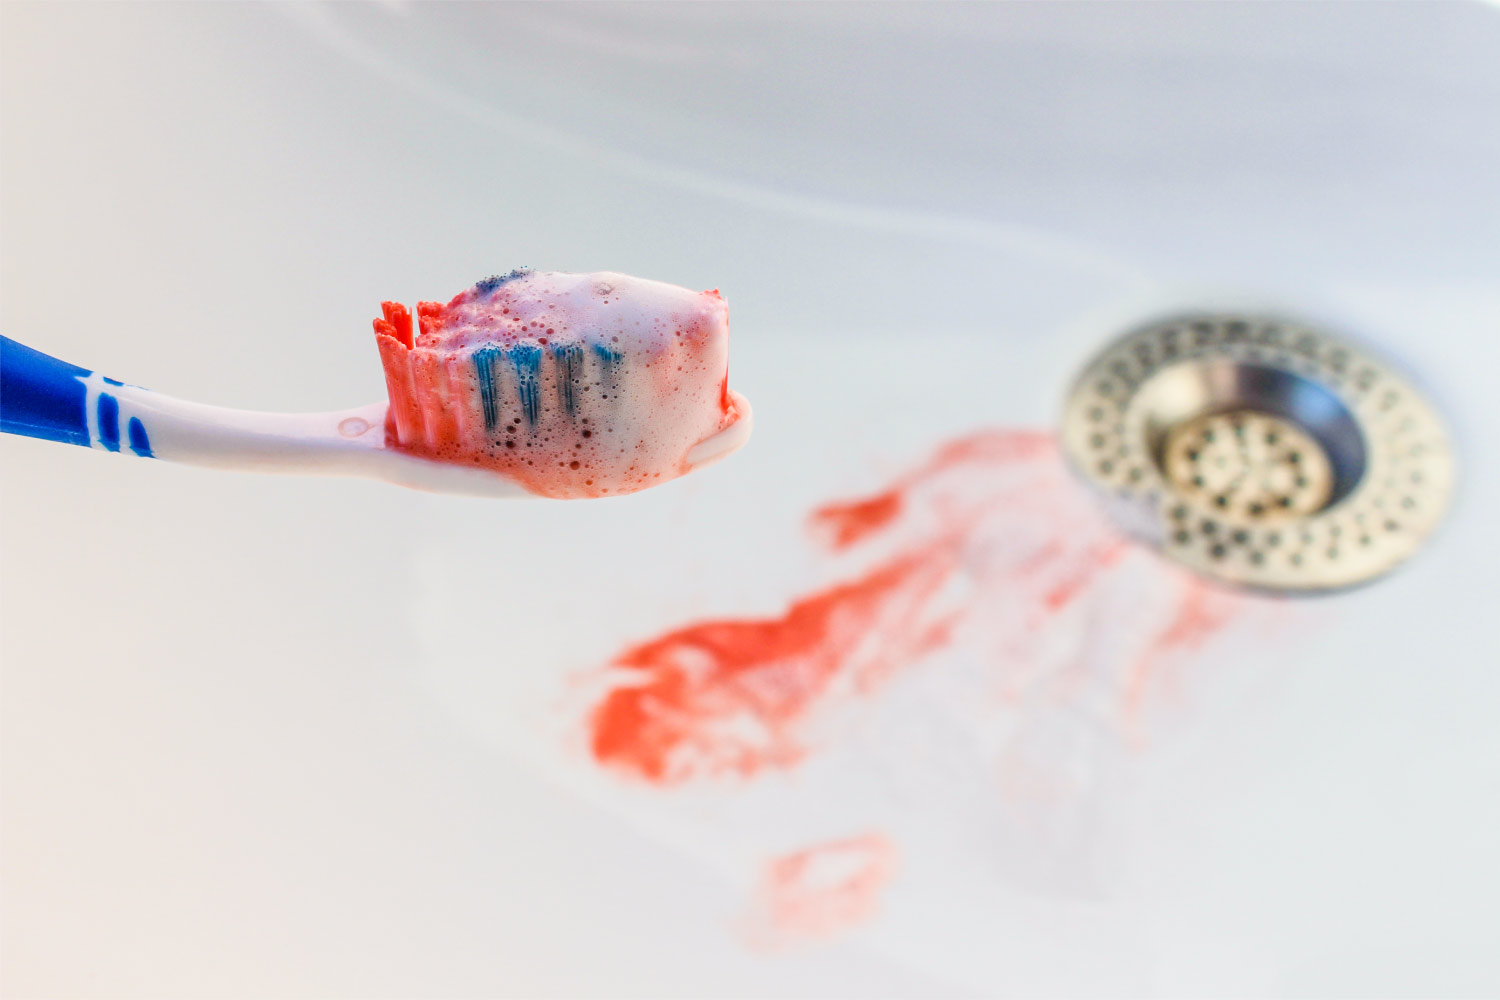 A toothbrush with blood and toothpaste foam over a sink with blood from gum disease